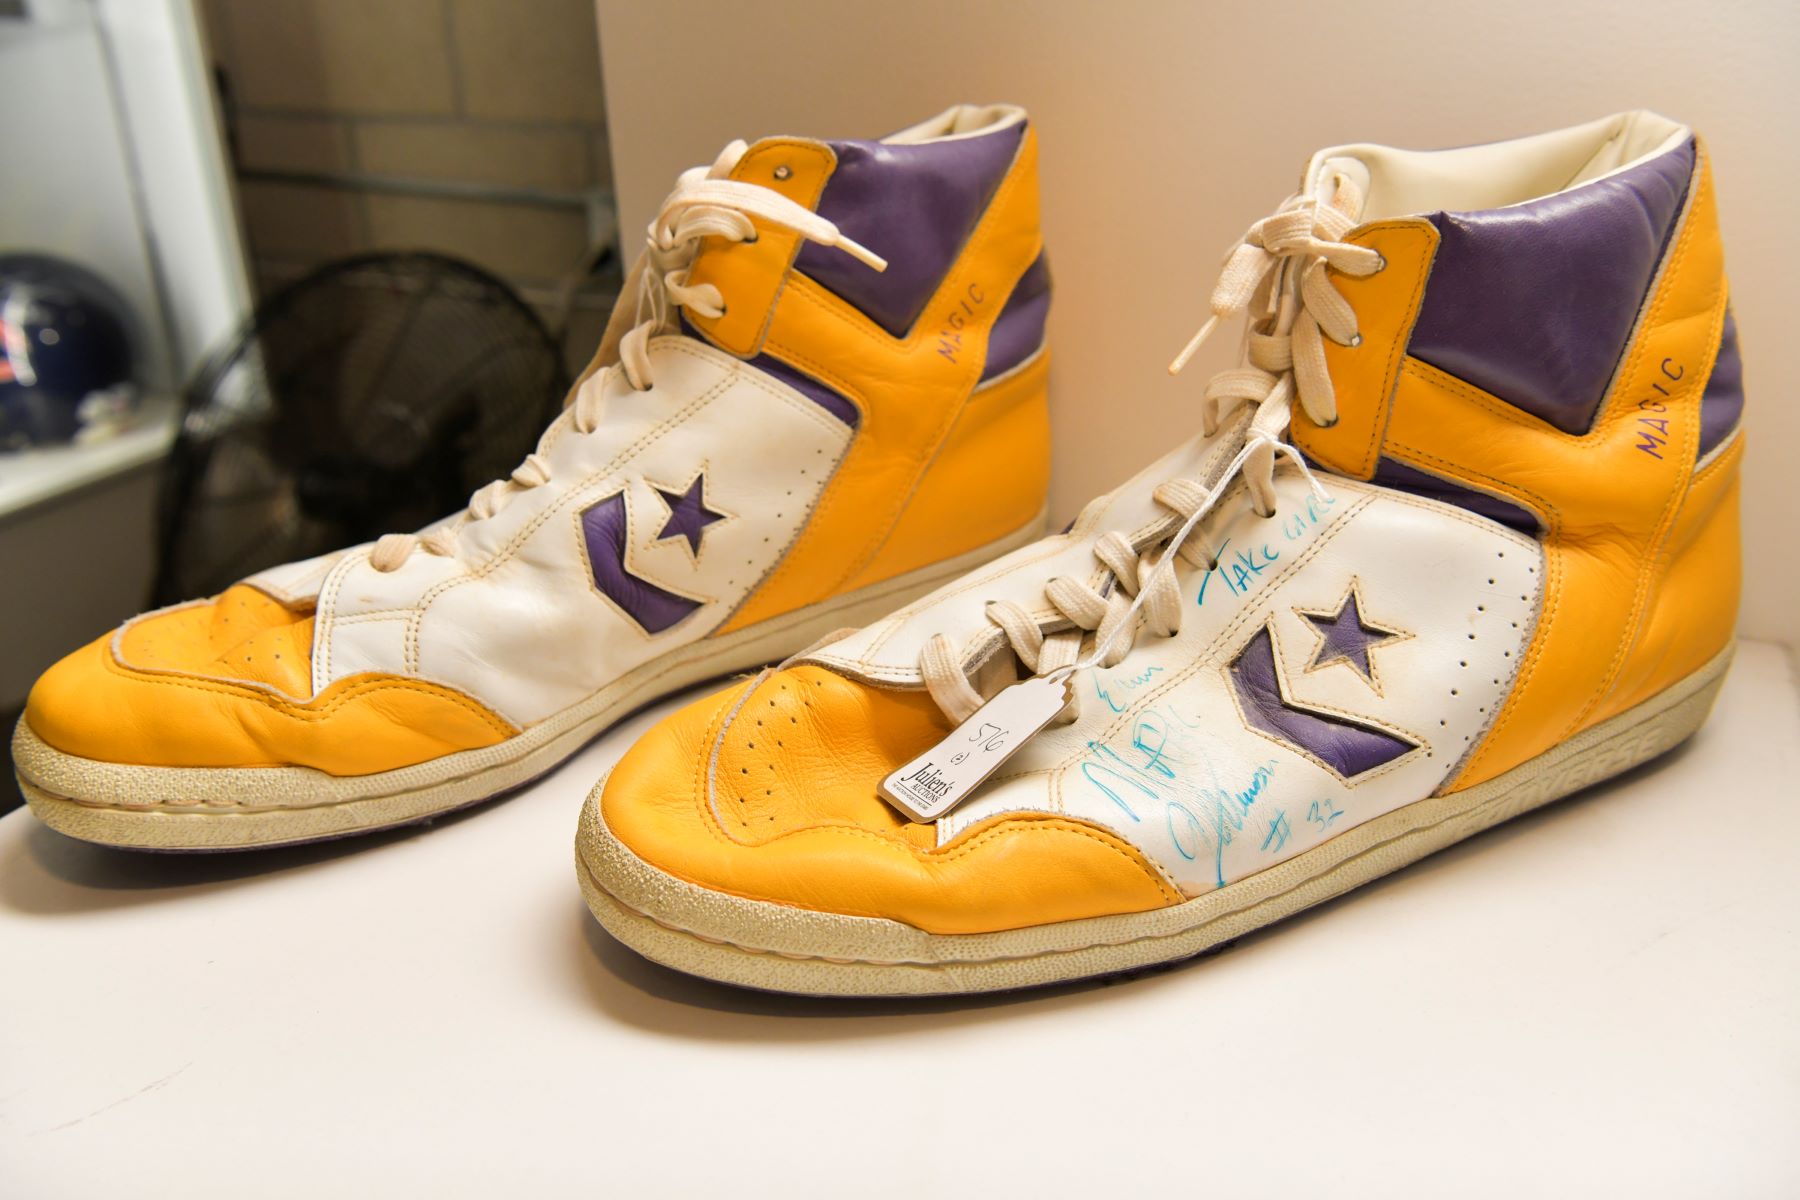 A signed pair of Magic Johnson's Los Angeles Lakers Converse shoes at Julien's Auctions Gallery